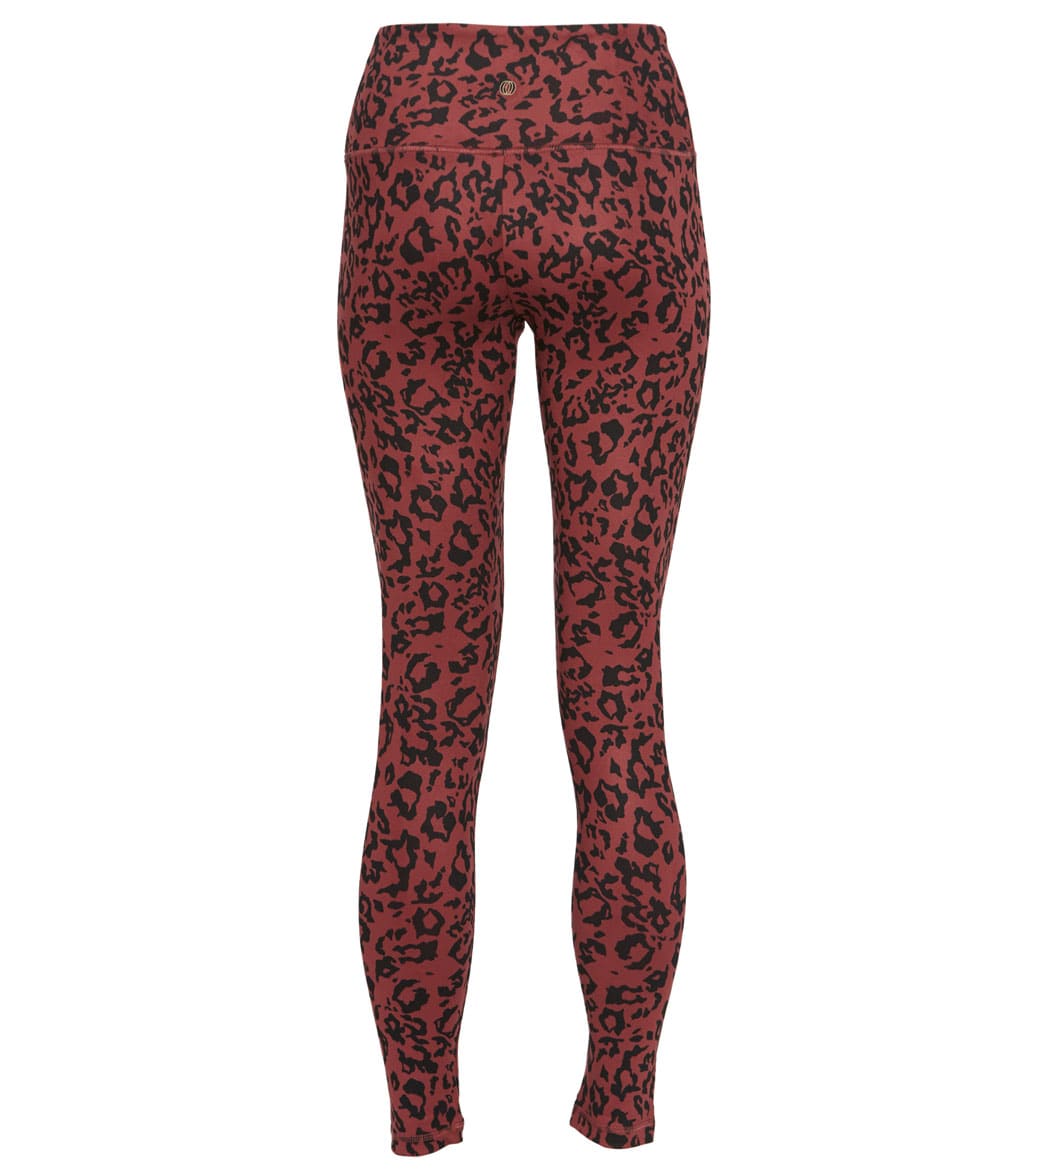 Balance Collection Contender Lux Printed Yoga Leggings at